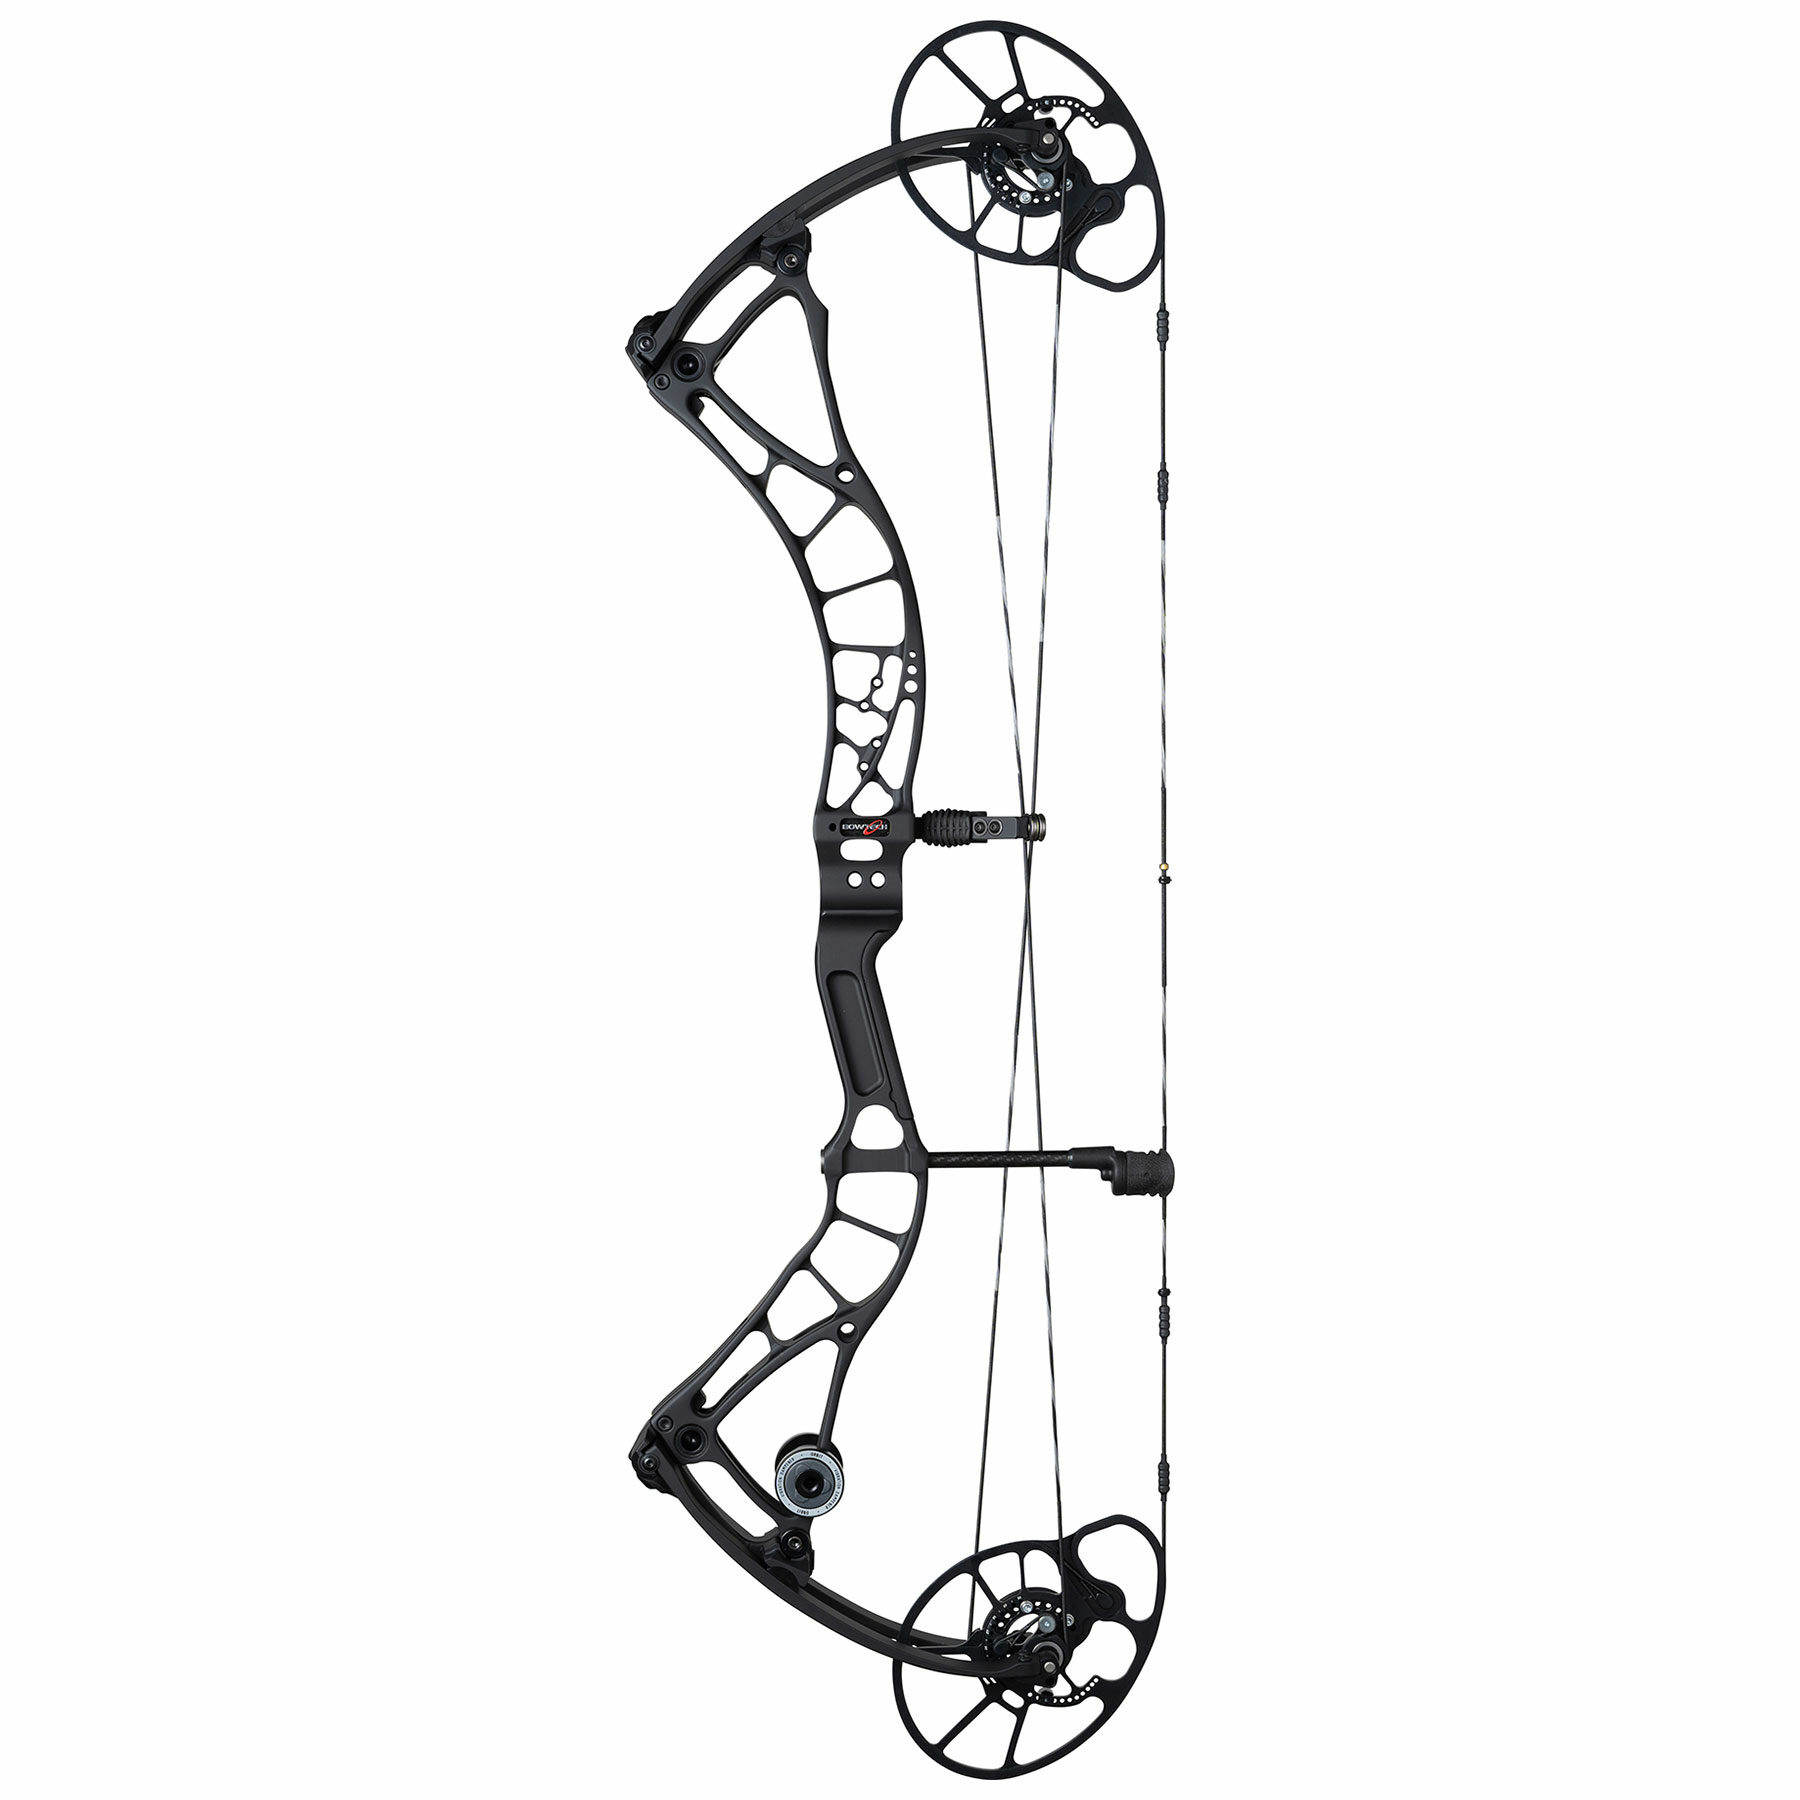 Black Solution archery hunting compound bow